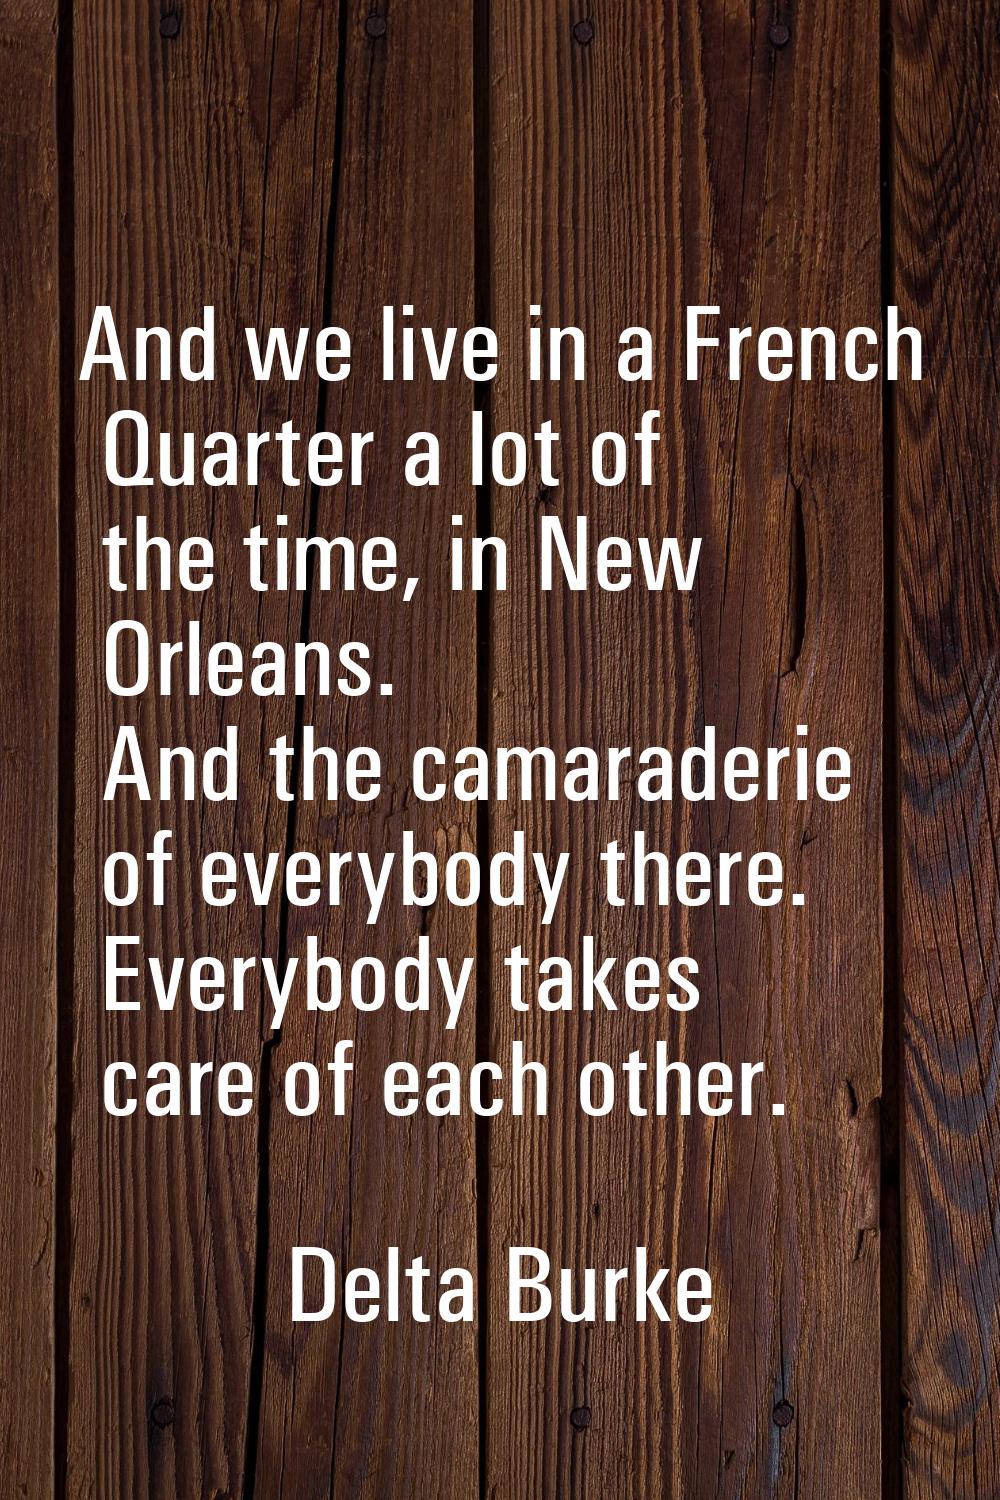 And we live in a French Quarter a lot of the time, in New Orleans. And the camaraderie of everybody